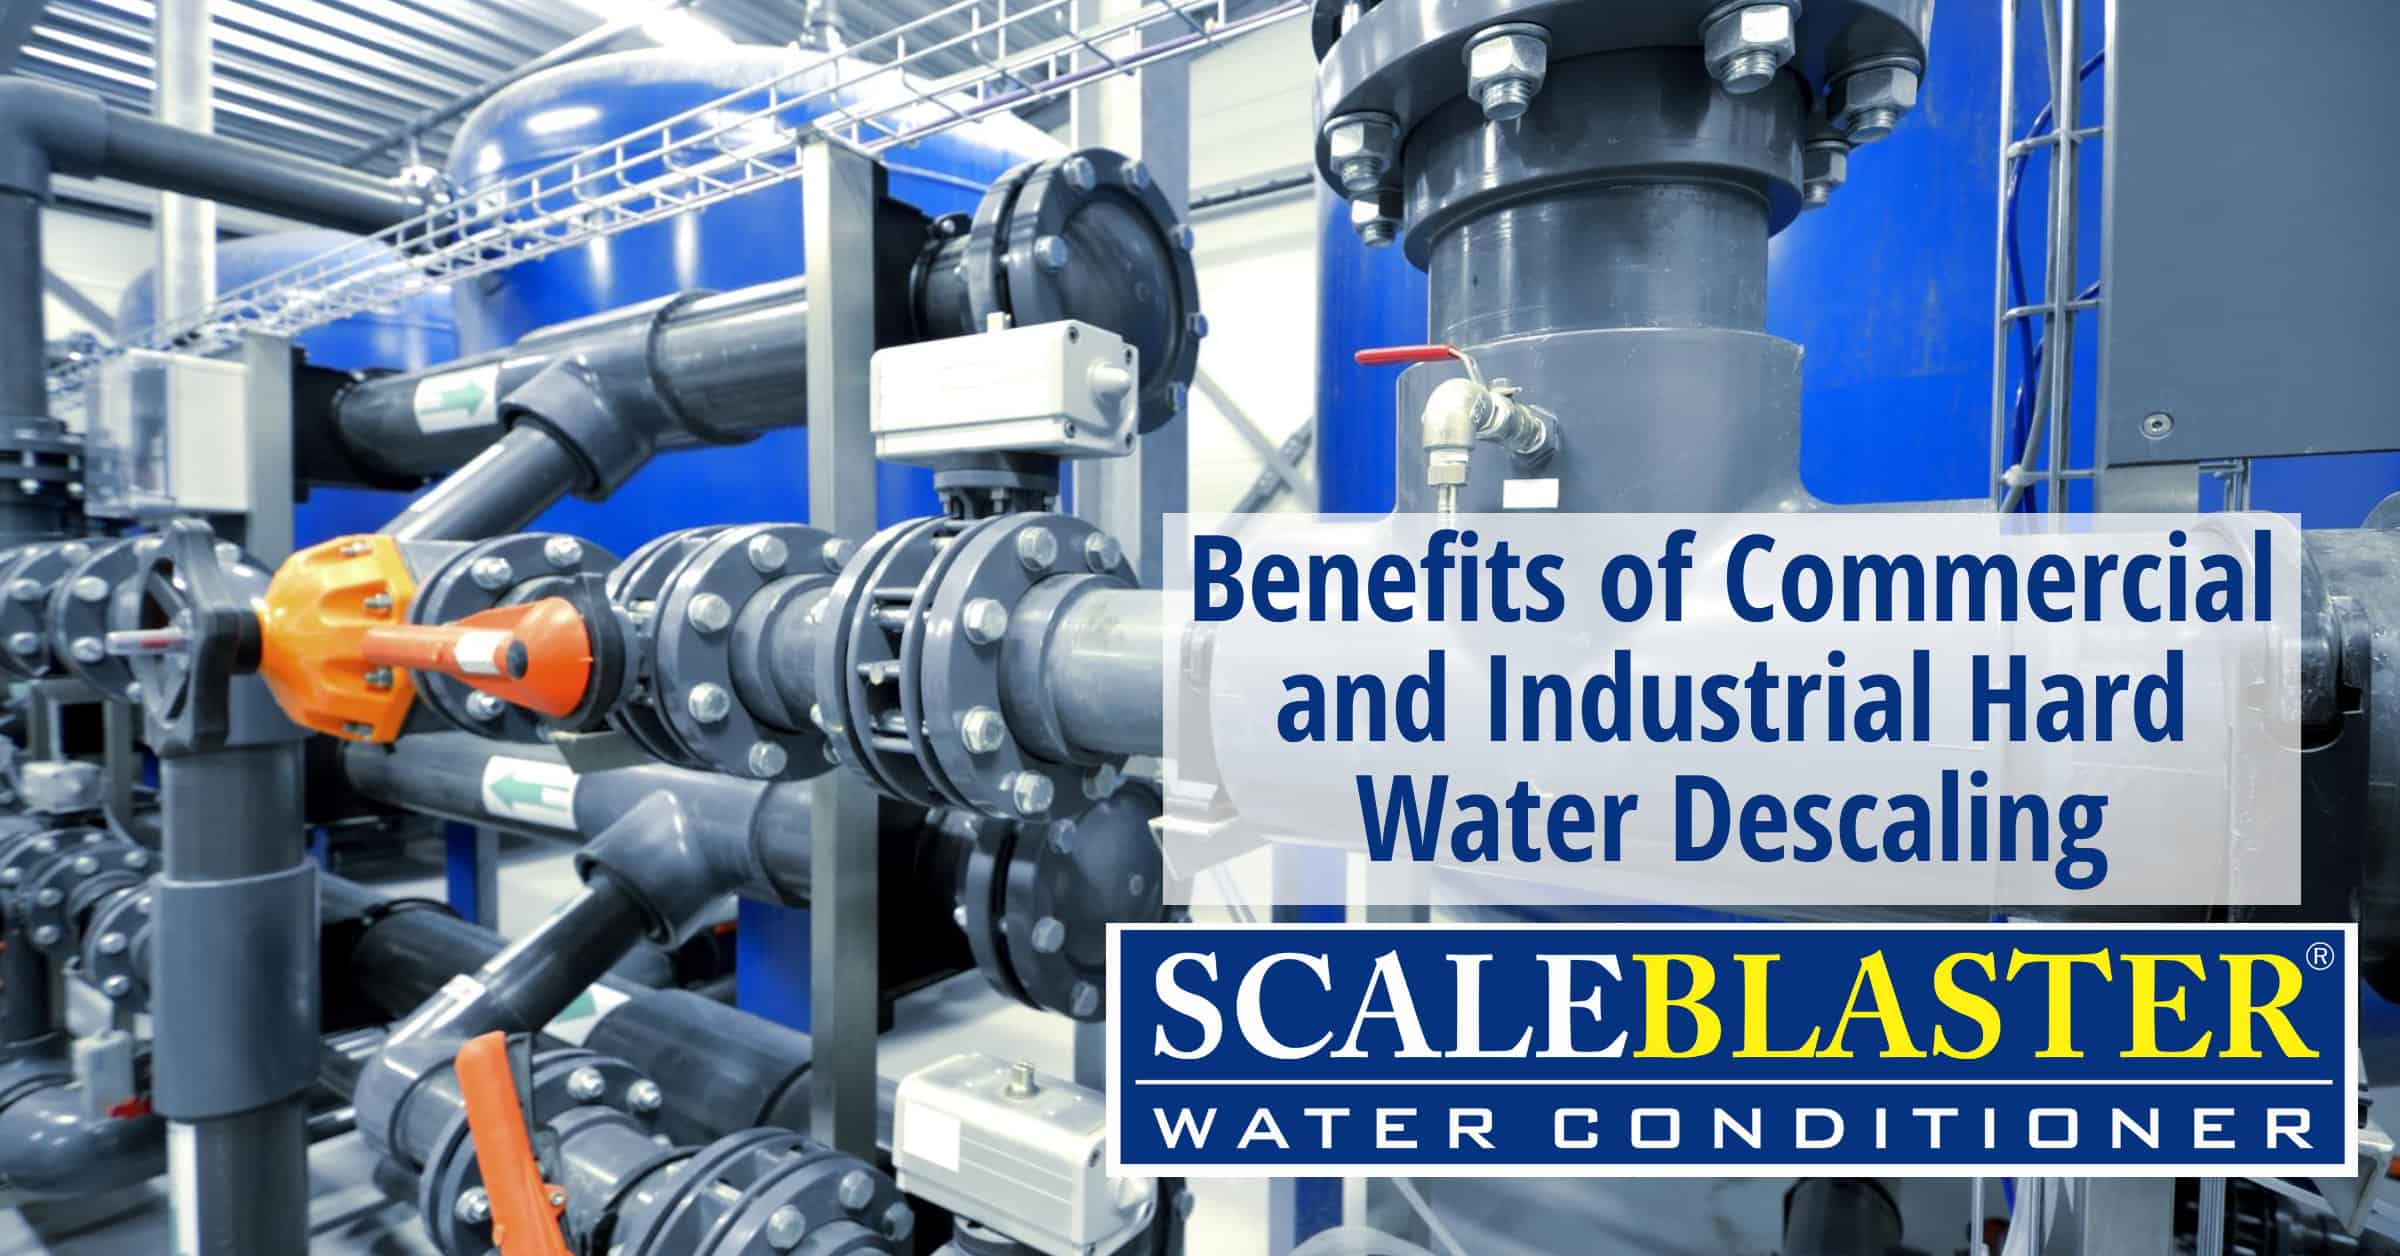 Benefits of Commercial and Industrial Hard Water Descaling